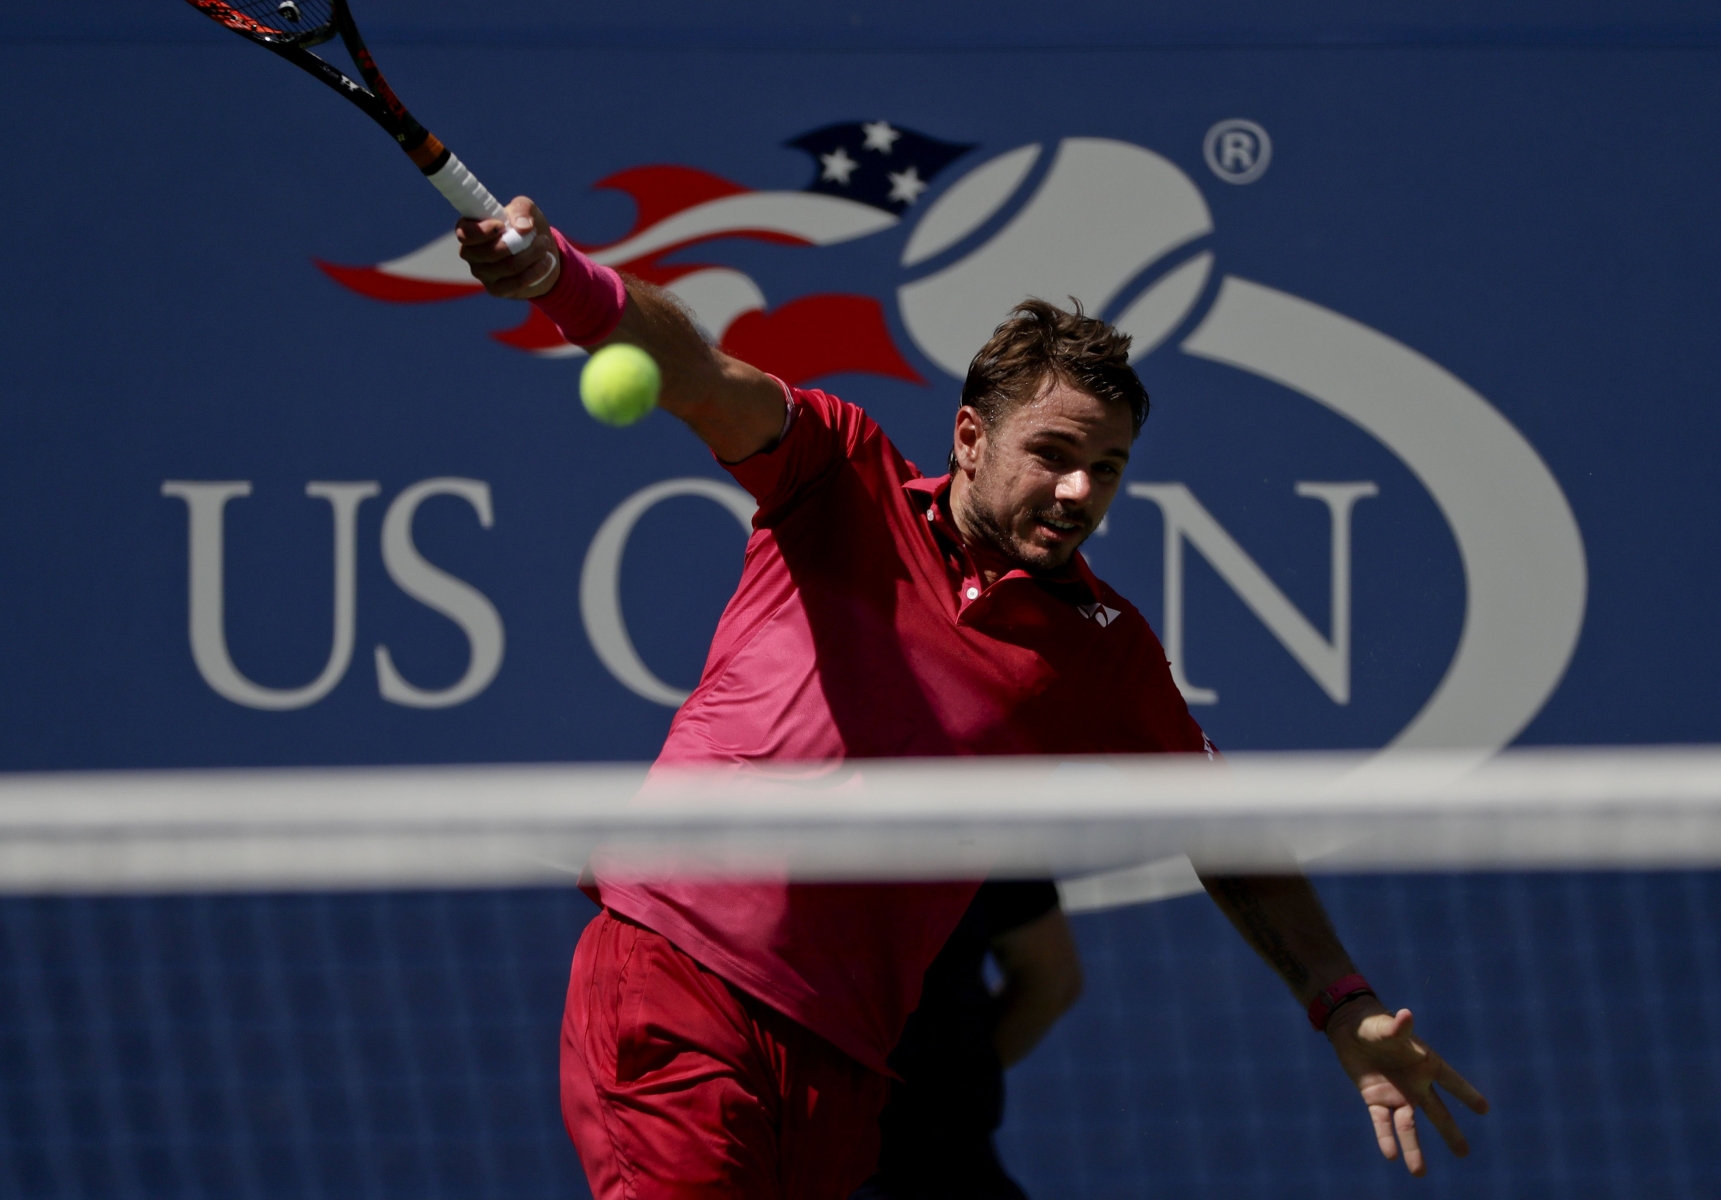 Stan Wawrinka, of Switzerland, returns a shot to Fernando Verdasco, of Spain, during the first round of the U.S. Open tennis tournament, Tuesday, Aug. 30, 2016, in New York. (AP Photo/Frank Franklin II)